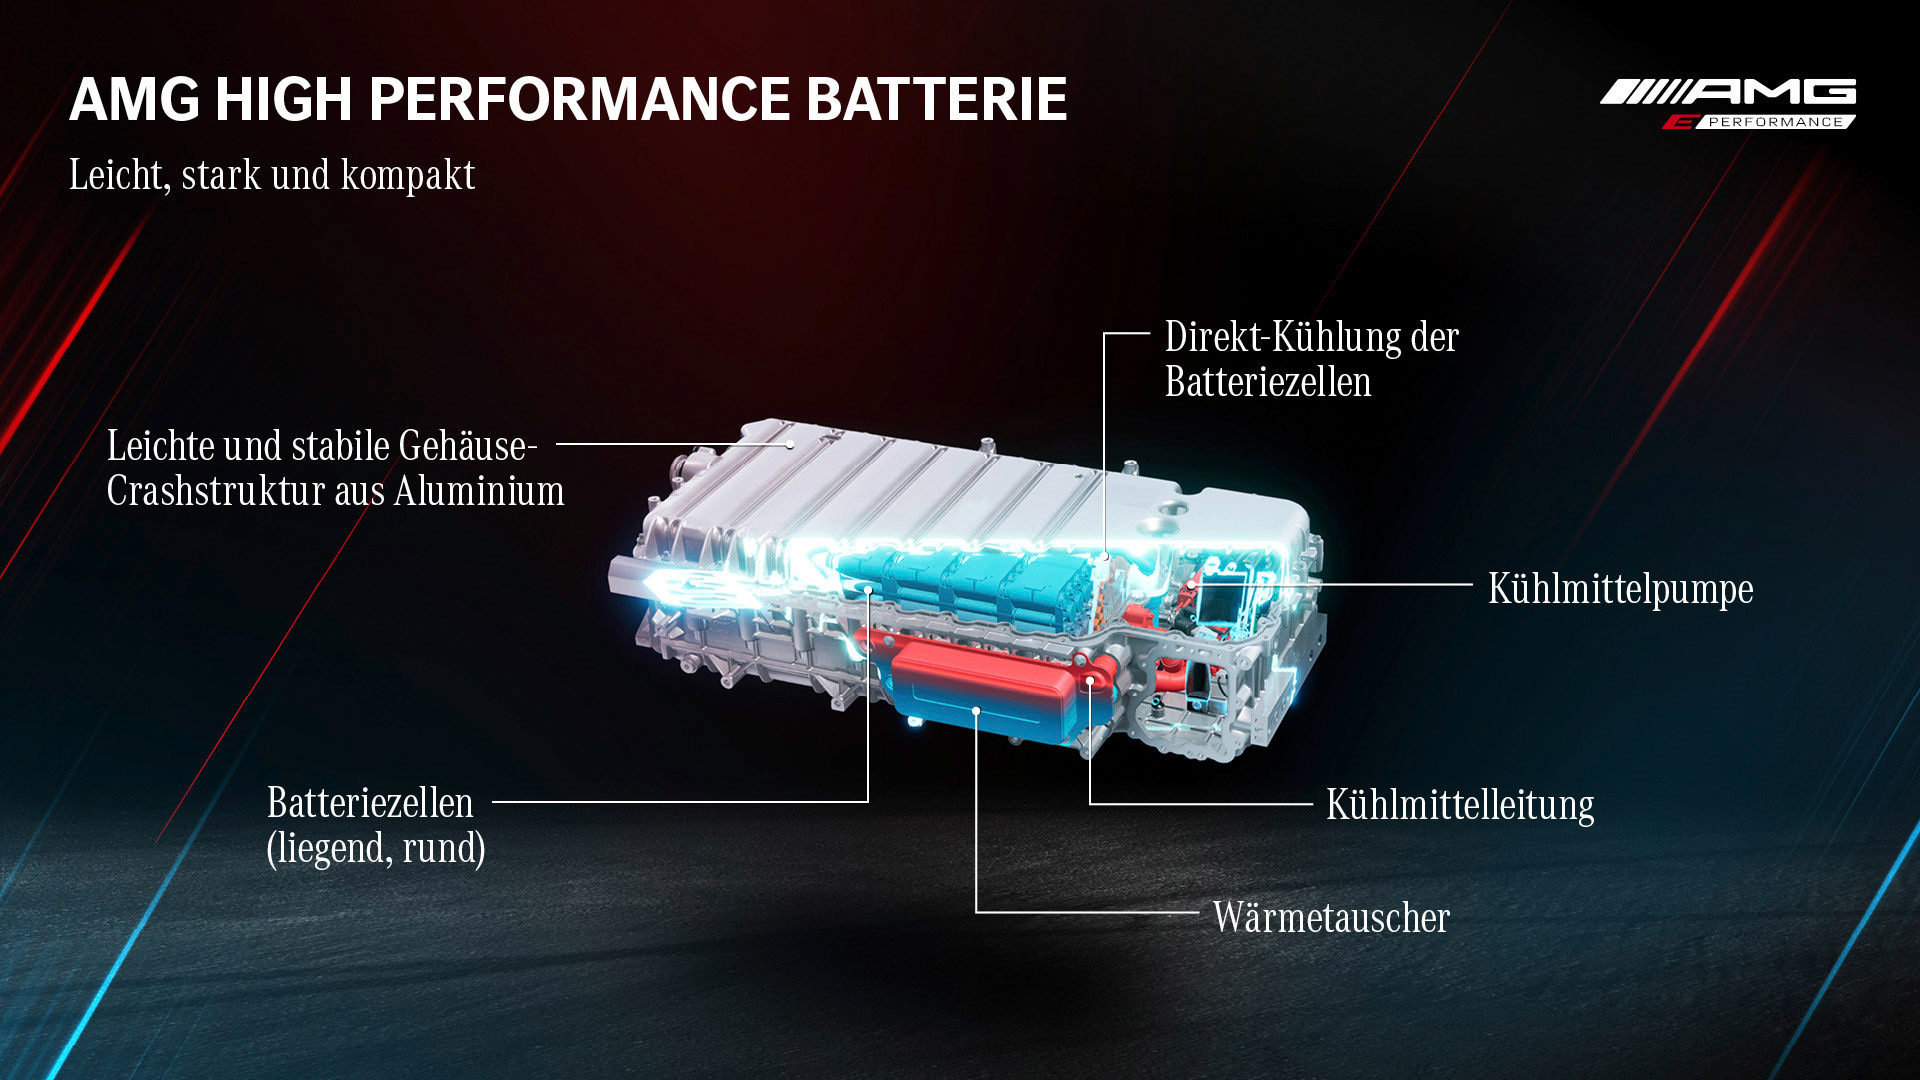 Mercedes AMG High Performance Powertrains. OLSF w16 Hybrid Performance 2400лс. 843hp New gt63s e-Performance. Mercedes AMG High Performance Powertrains logo. Battery and performance